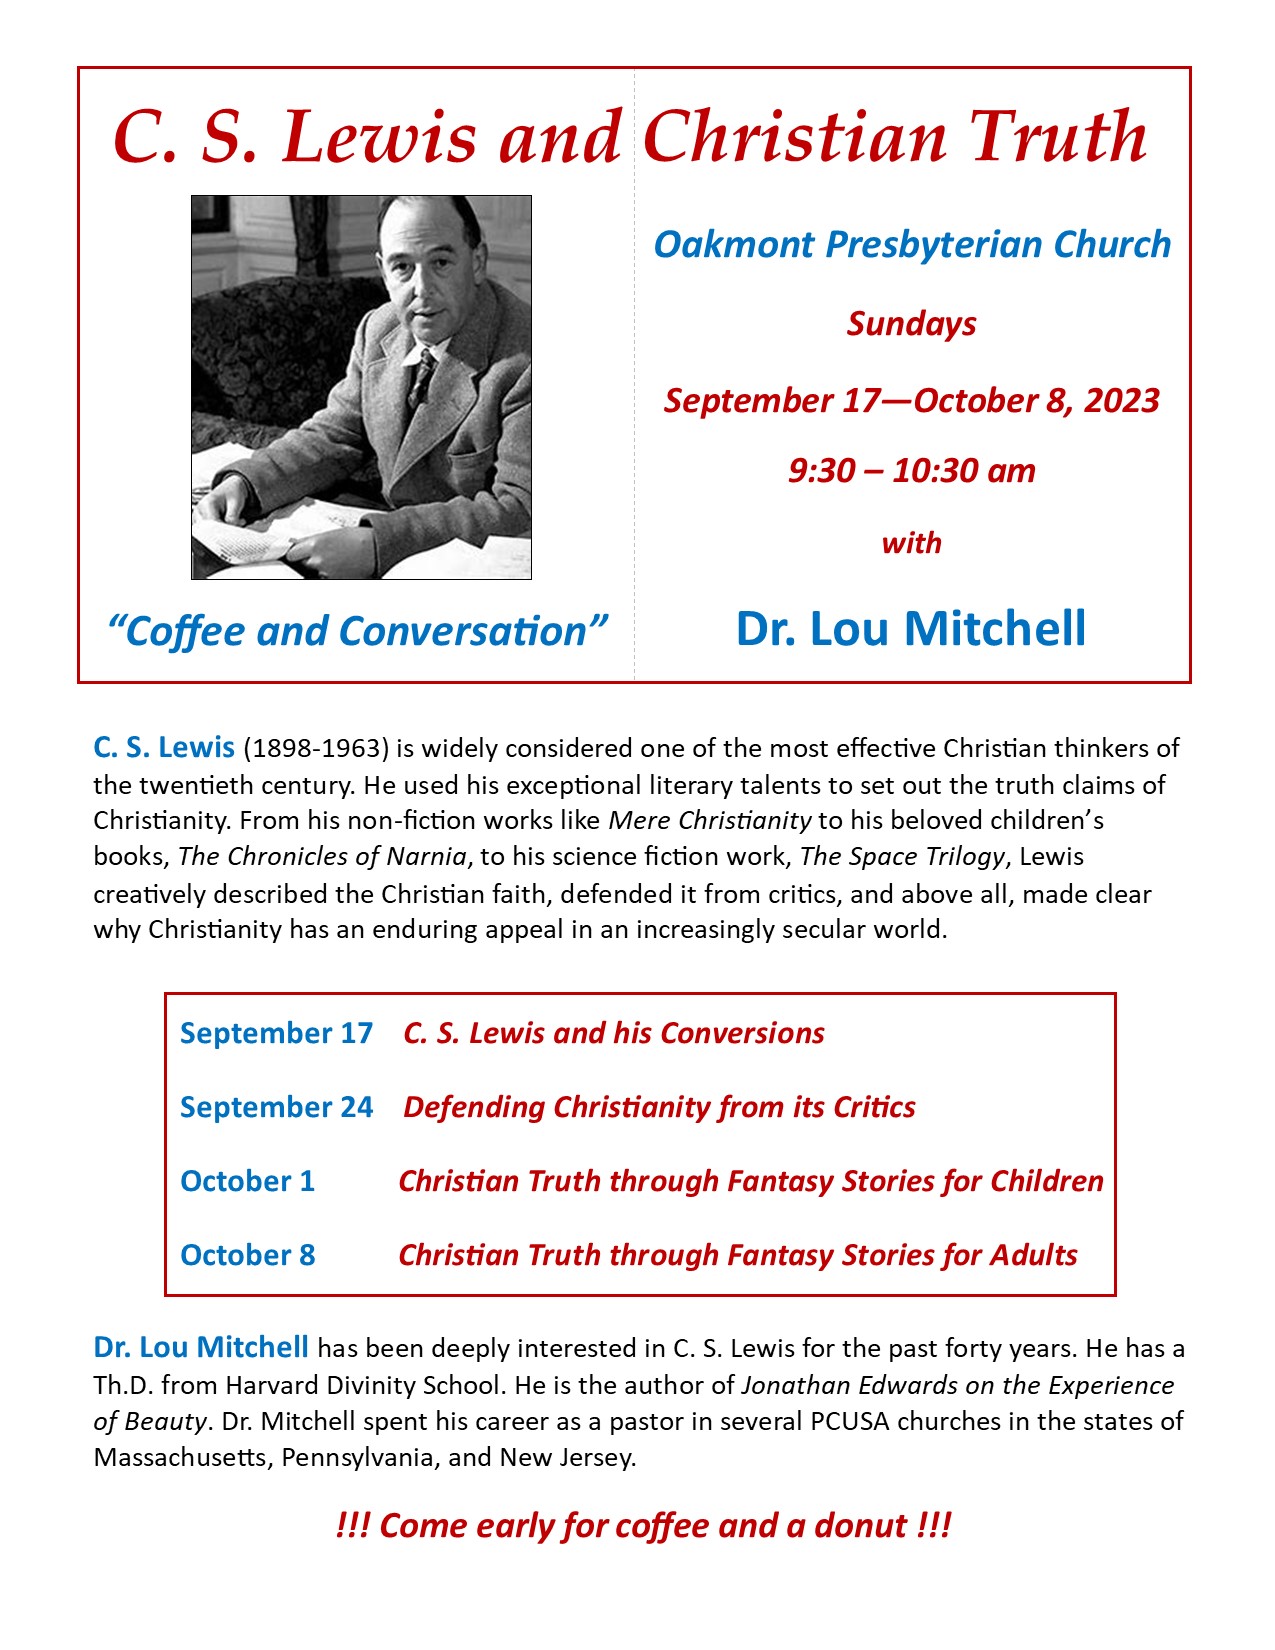 Dr. Lou Mitchell presents C.S. Lewis and Christian Truth